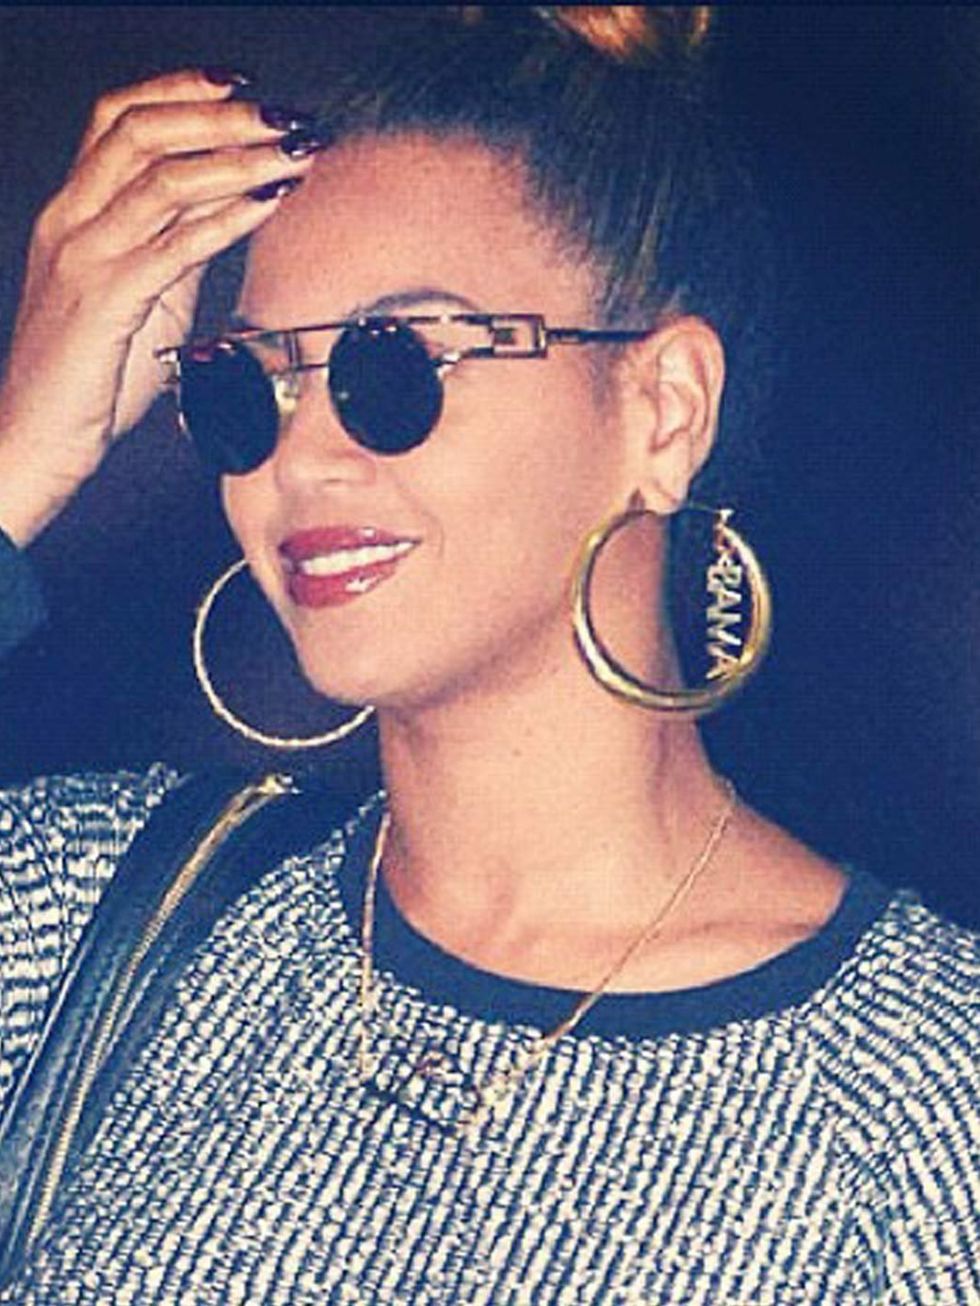 <p><a href="http://www.elleuk.com/star-style/news/beyonce-s-political-fashion-statement">Beyonce</a> shows her Presidential campaign support with her Obama endorsing earrings.</p>